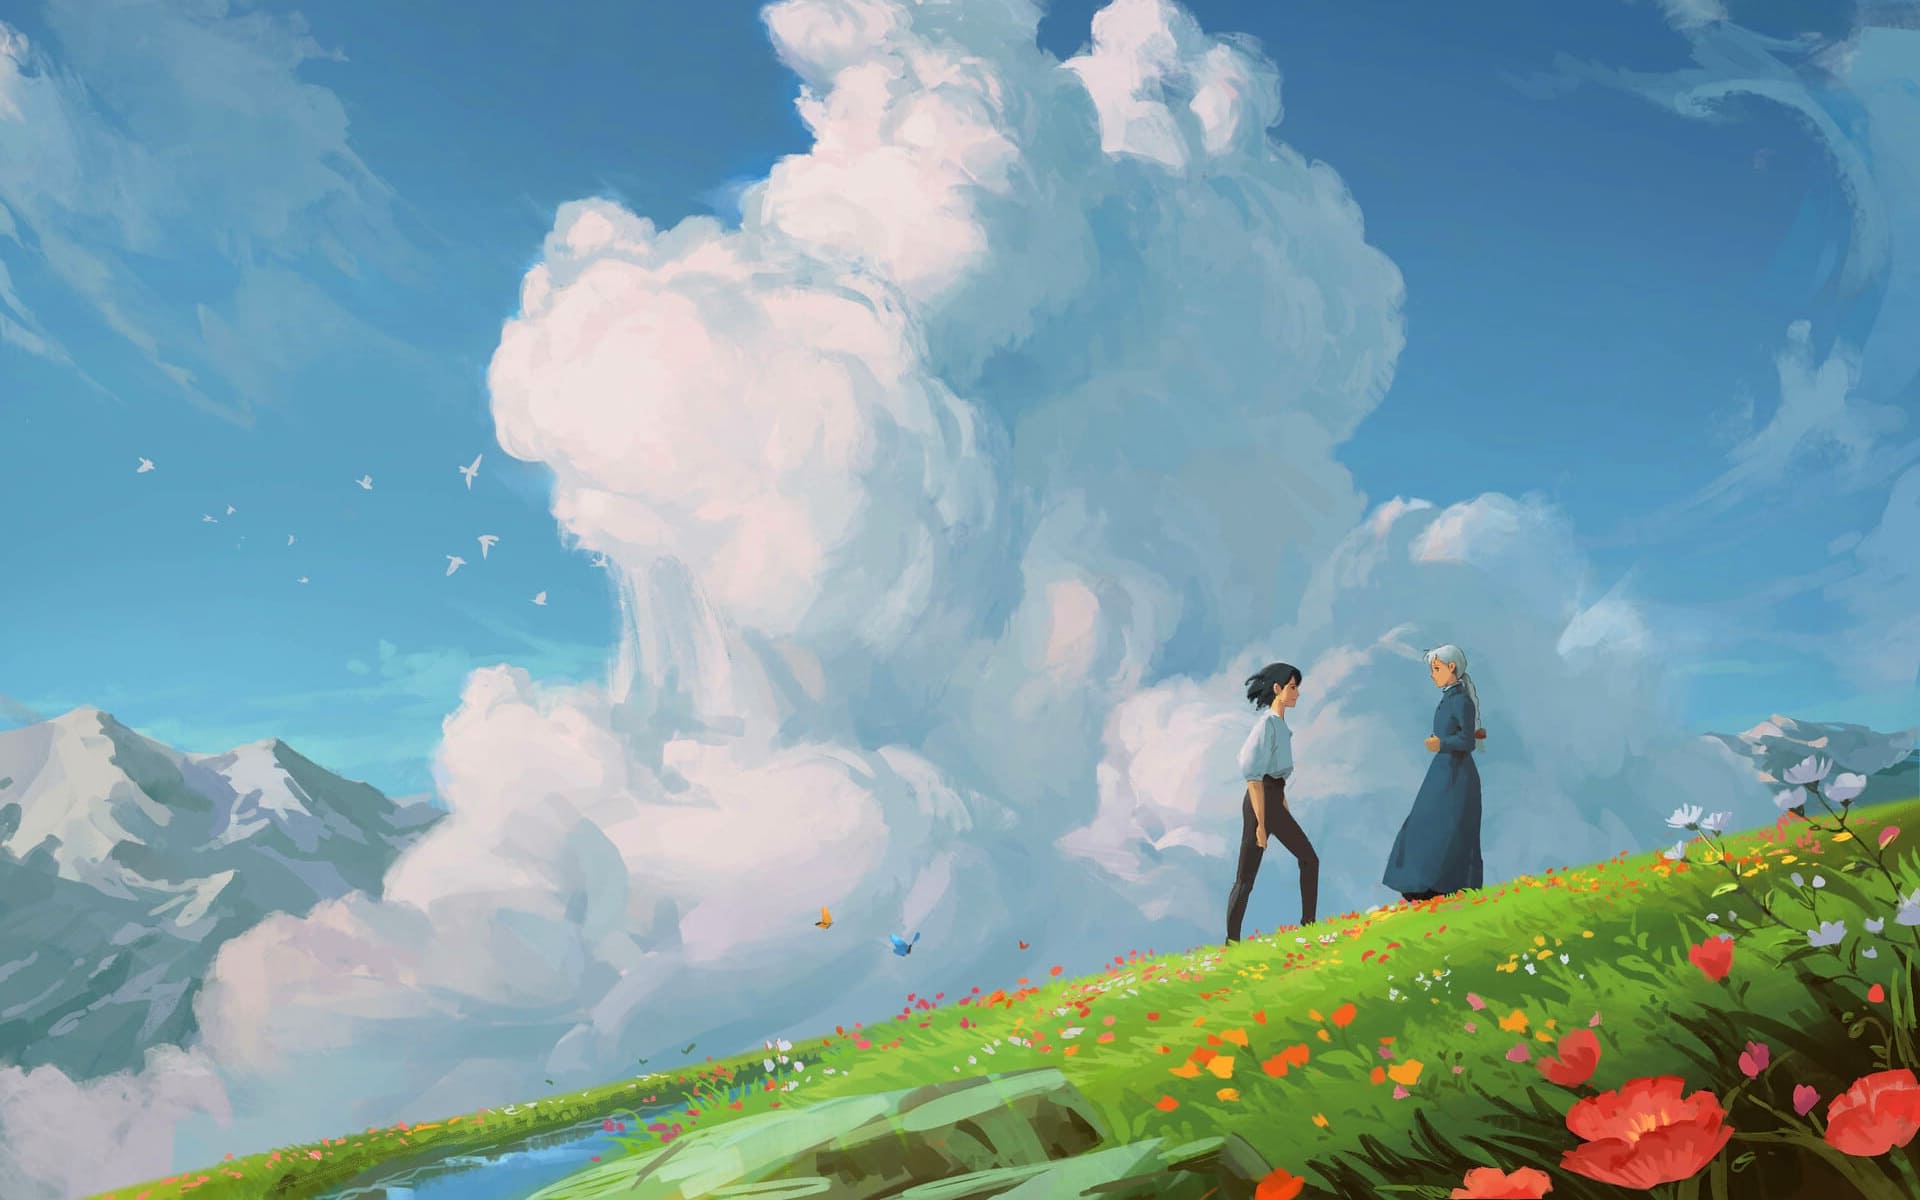 Howls Moving Castle Wallpapers